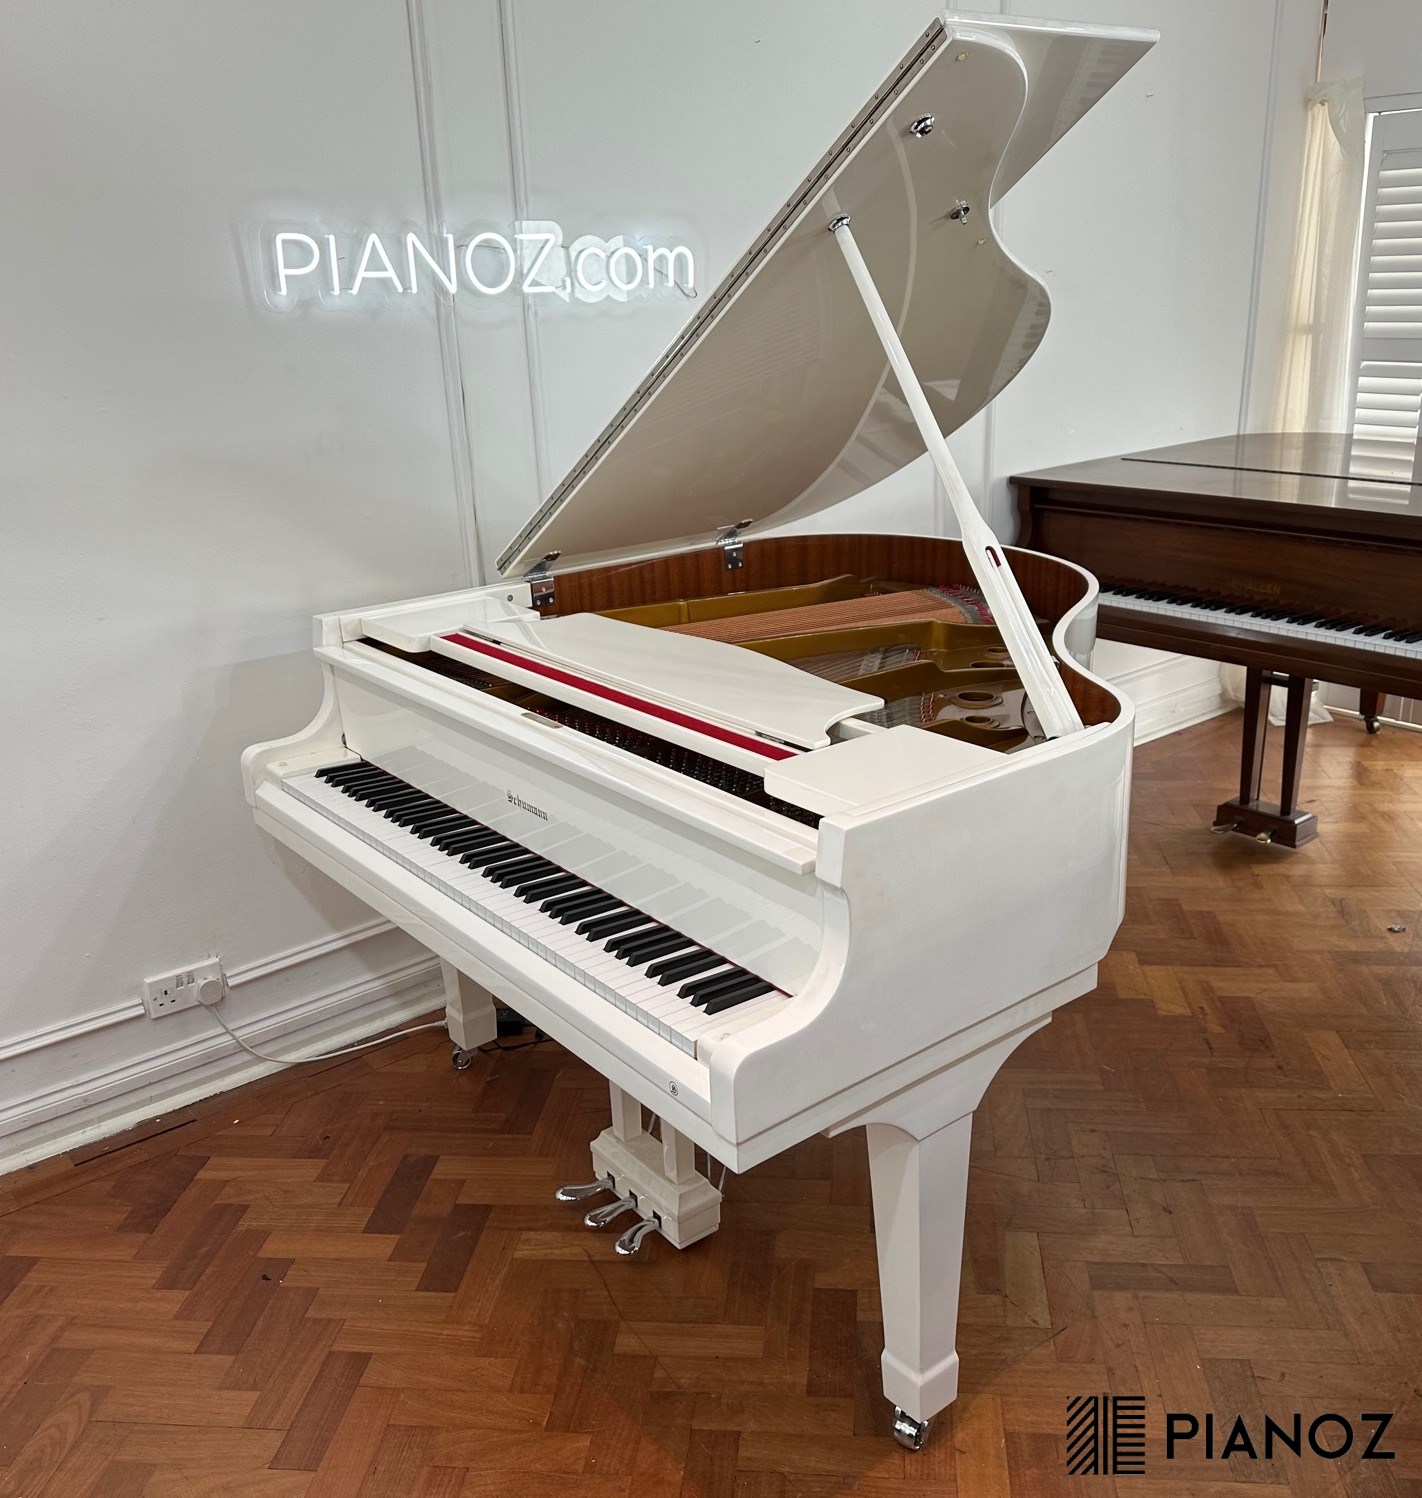 Schumann White Baby Grand Piano piano for sale in UK